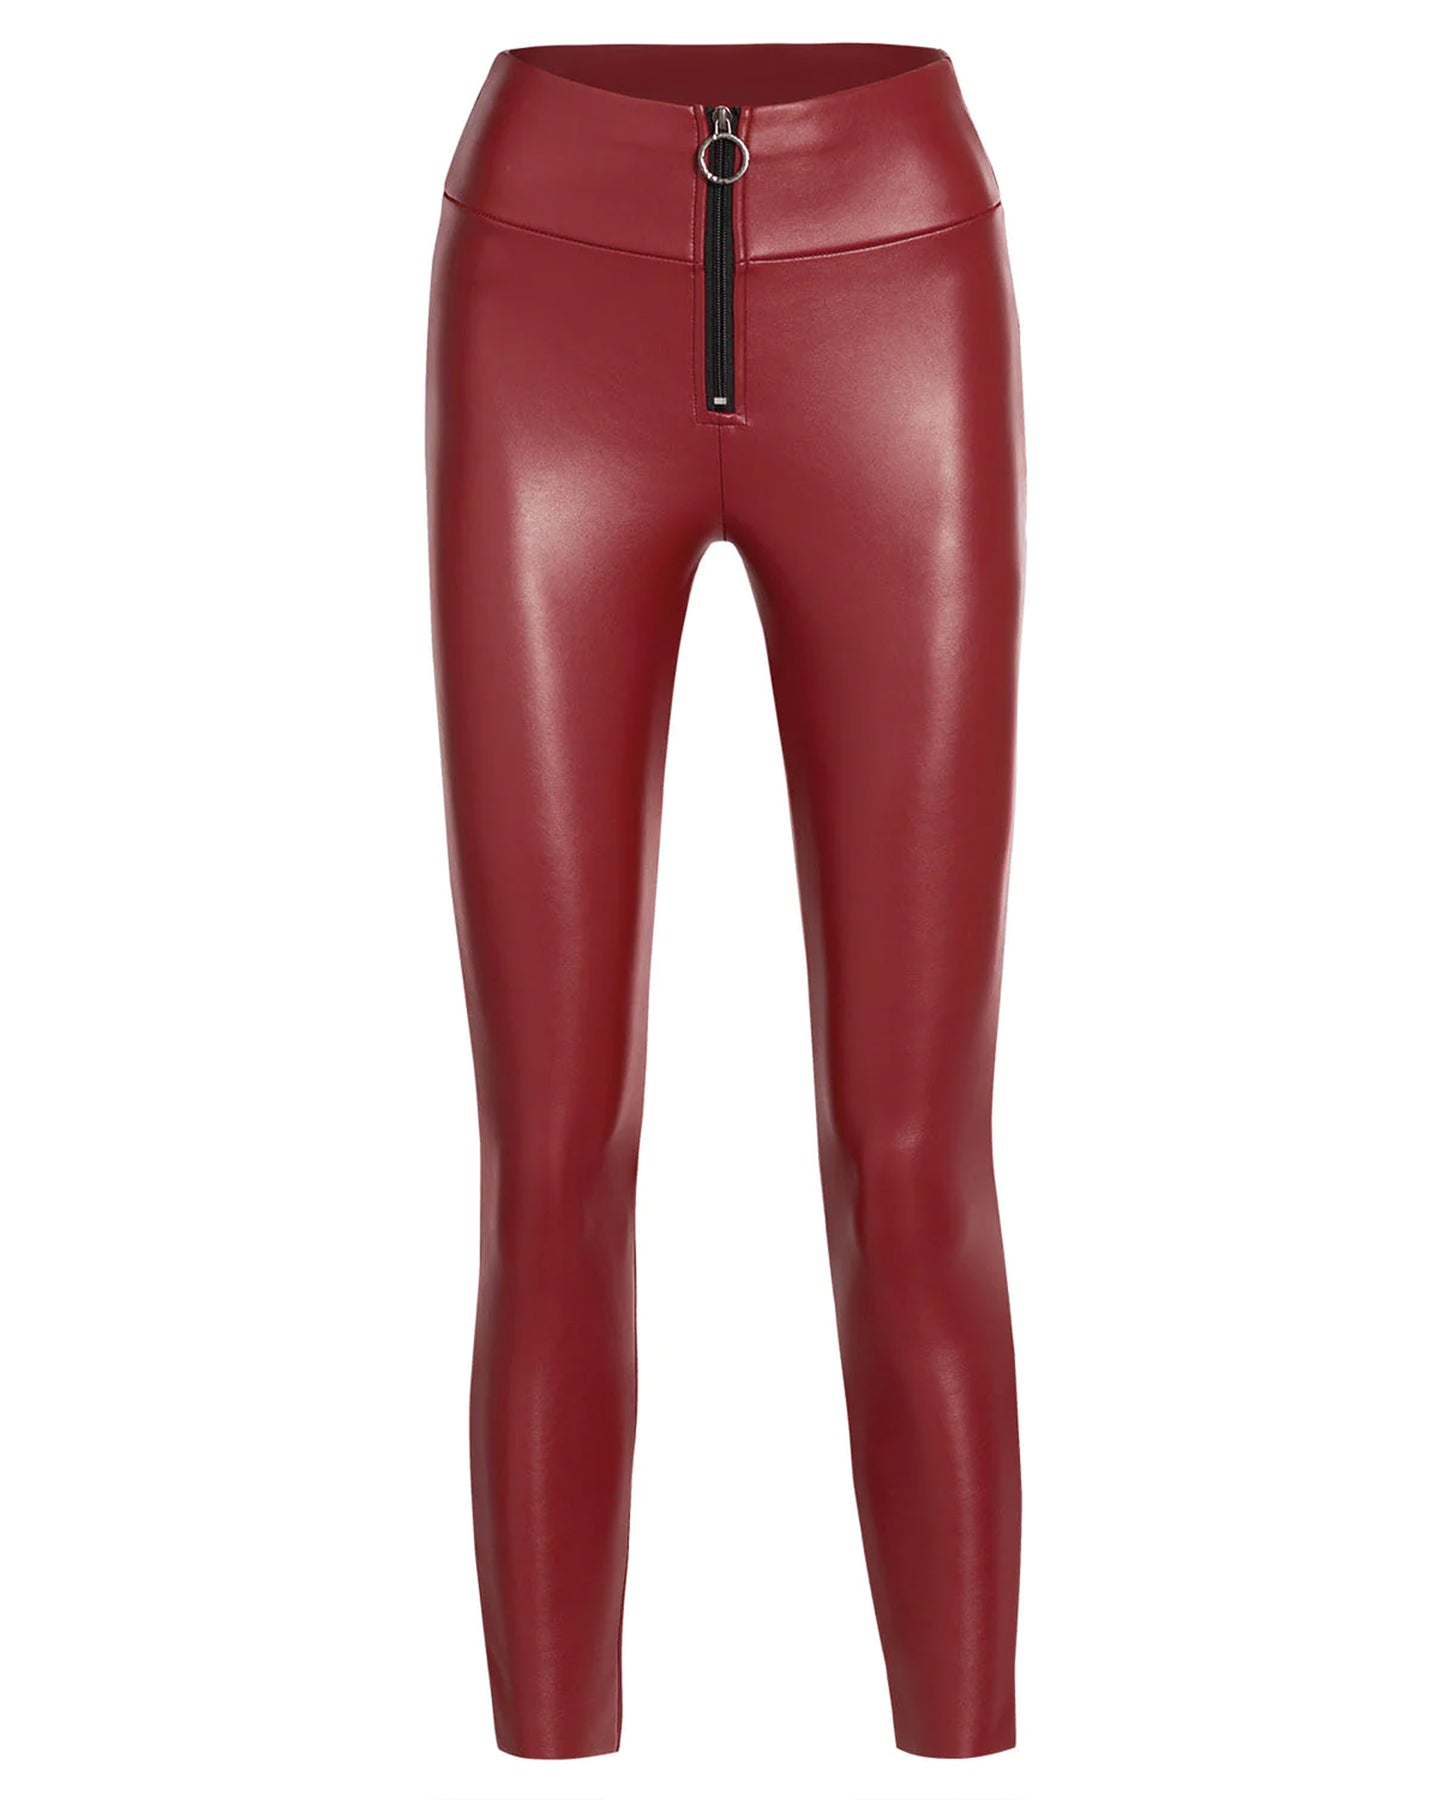 Ysabel Mora 70281 Leggings - Maroon dark red high waisted faux leather fleece lined trouser leggings with zip closure, ring pull, deep waist band with darts at the back to ensure a snug fit.